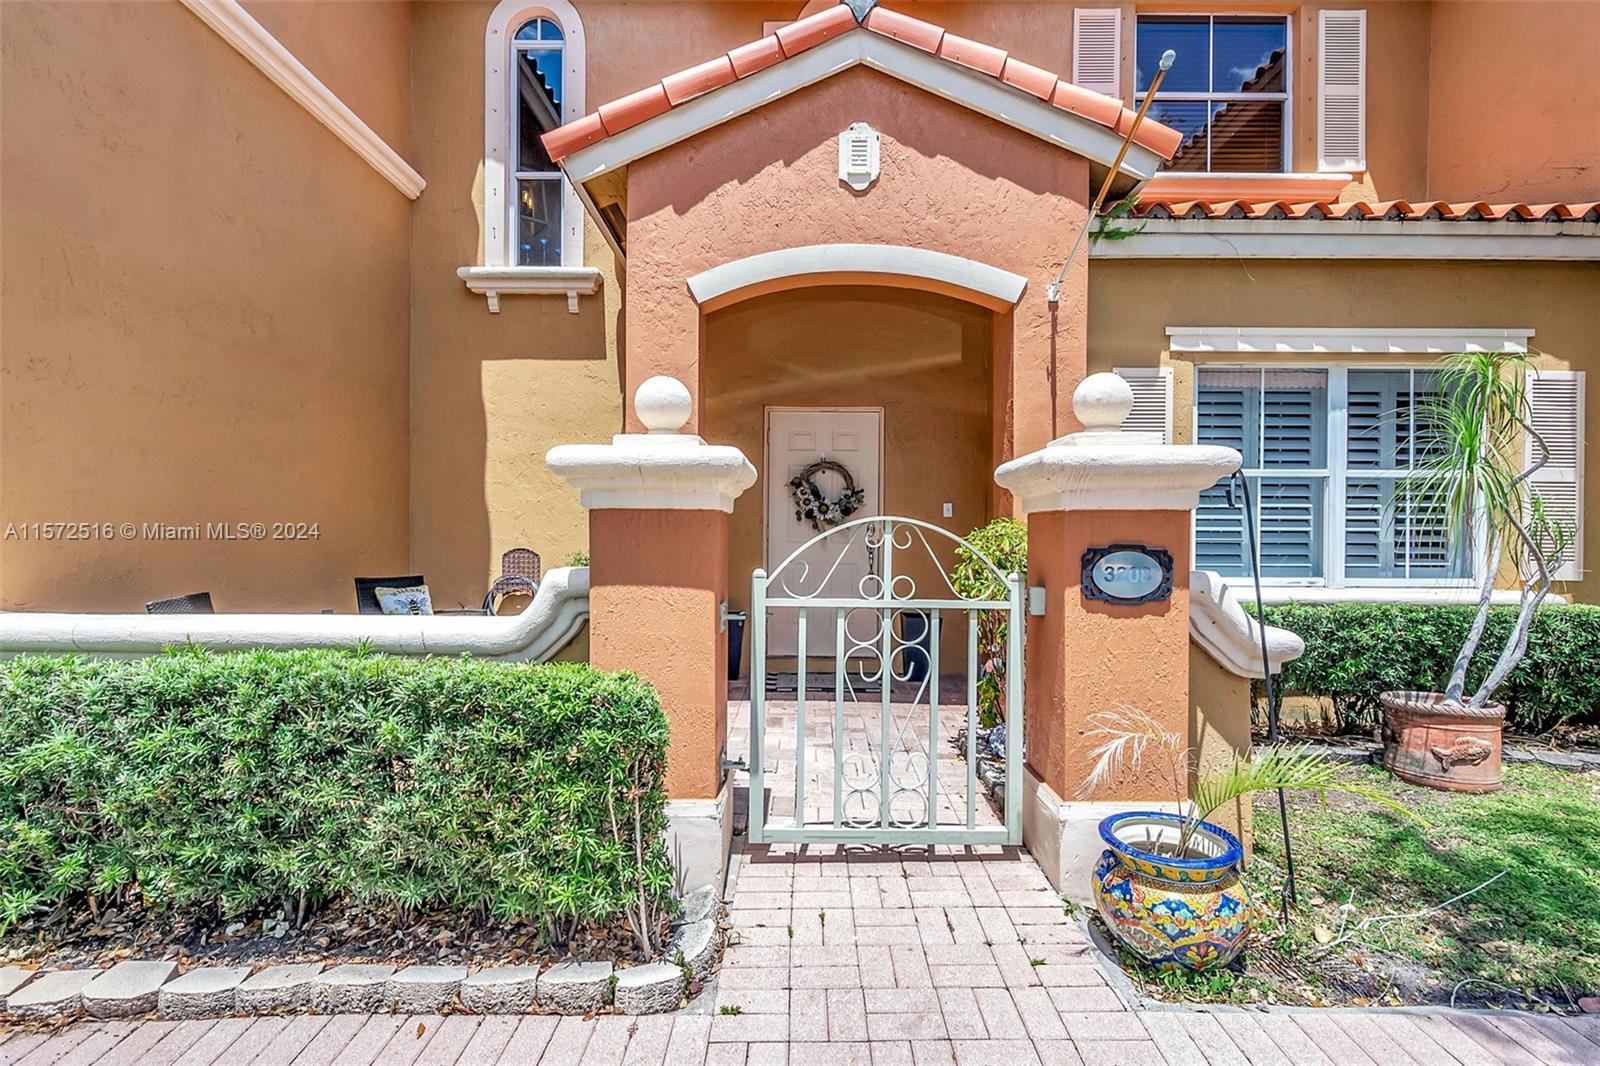 AWESOME OPPORTUNITY TO LIVE IN HIGHLY DESIRED GATED COMMUNITY OF VILLA VIZCAYA IN MIAMI LAKES. 2 MAS